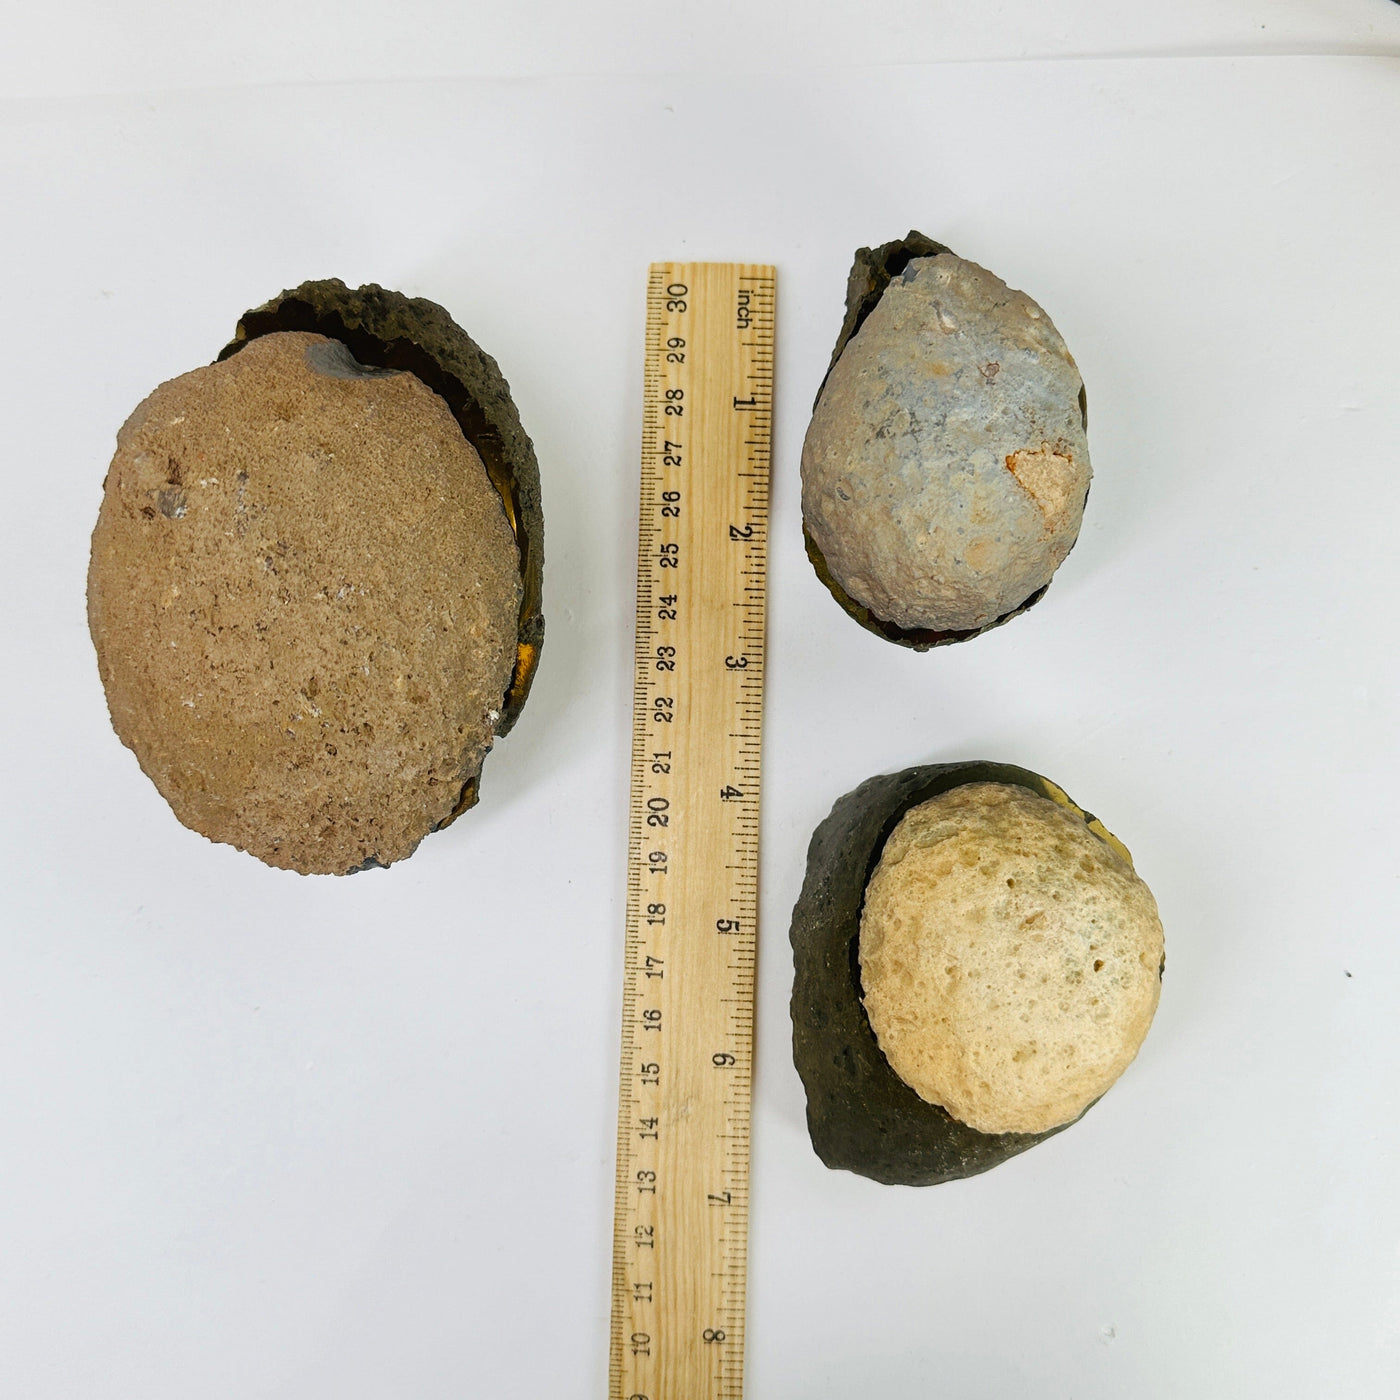 coated geode box next to a ruler for size reference